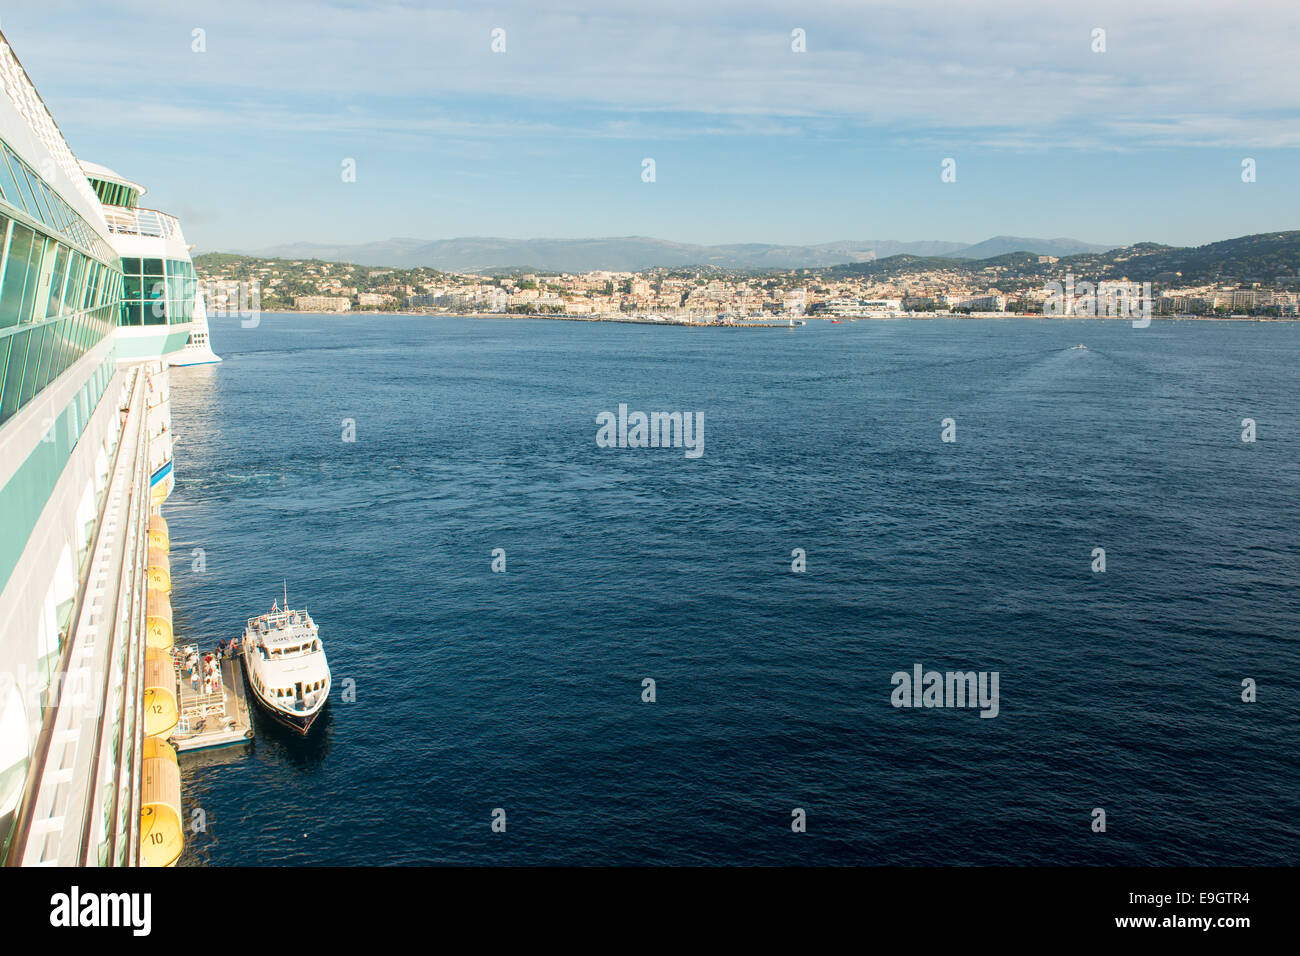 A tender boat awaits passengers to take to shore in Cannes, France, from Royal Caribbean's cruise ship Adventure Of The Seas Stock Photo